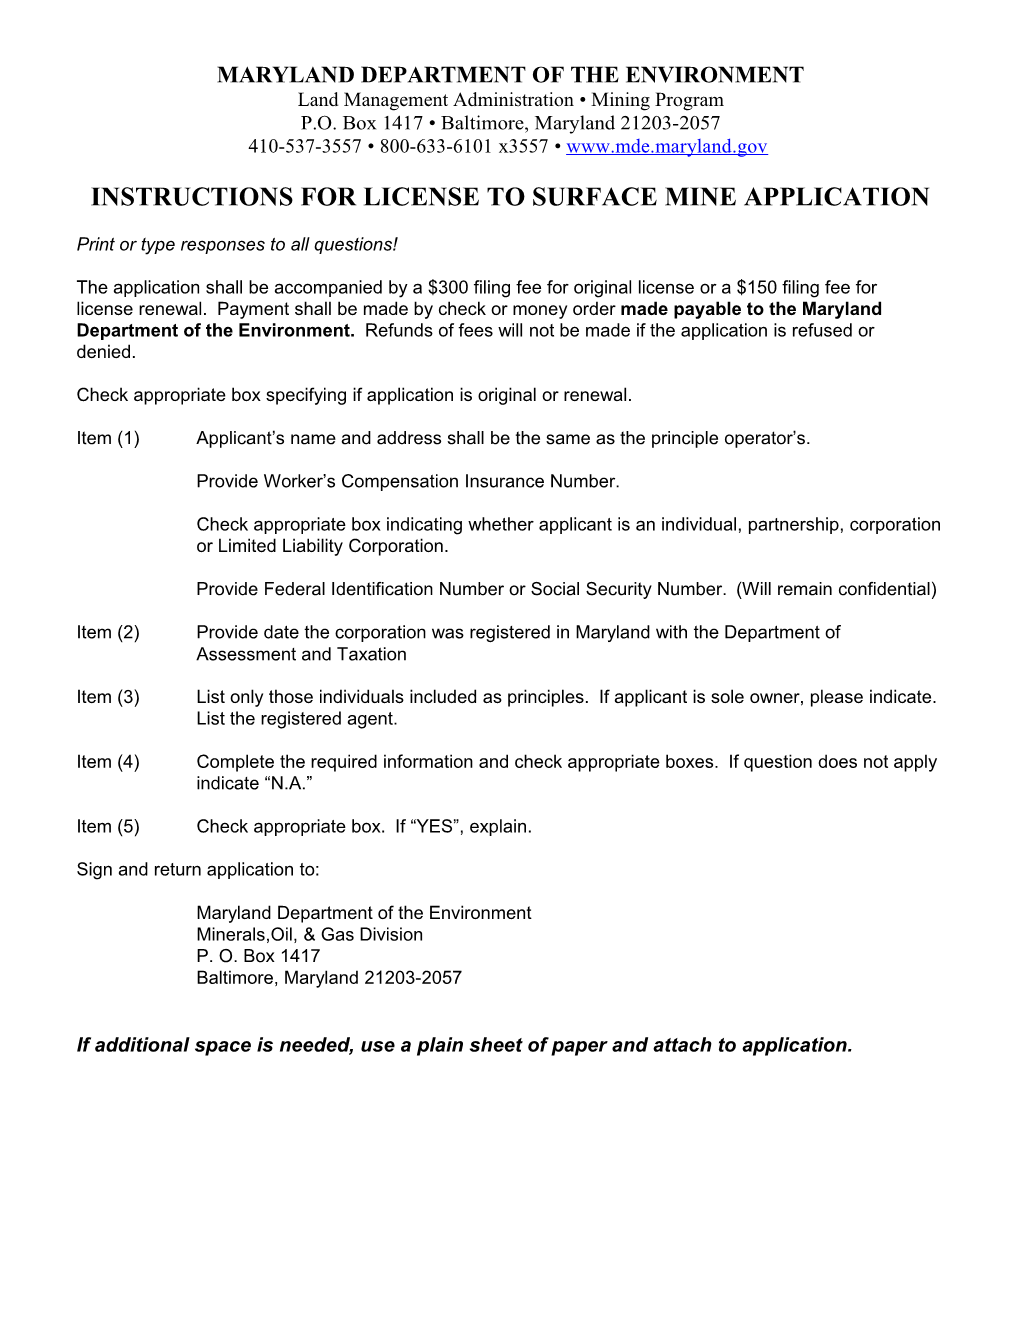 Application for License to Surface Mine